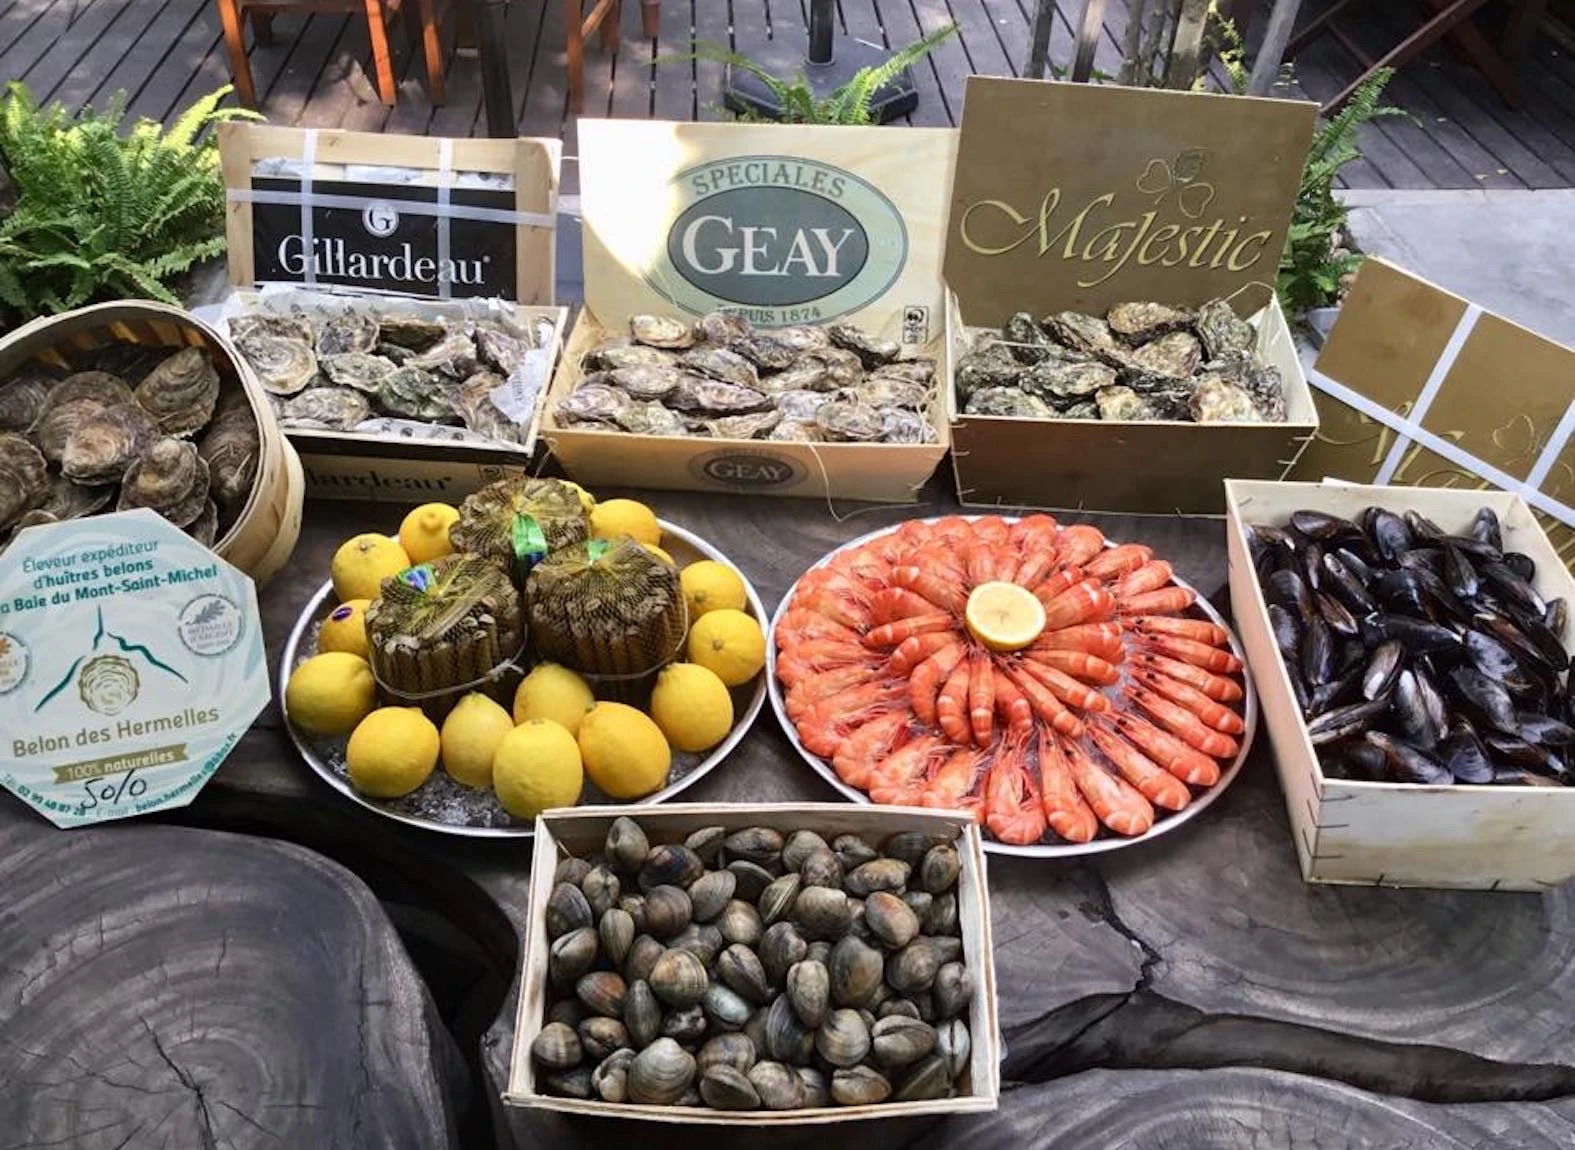 Here are oysters and seafood platters in the french restaurant of Le Cabanon in Bangkok.